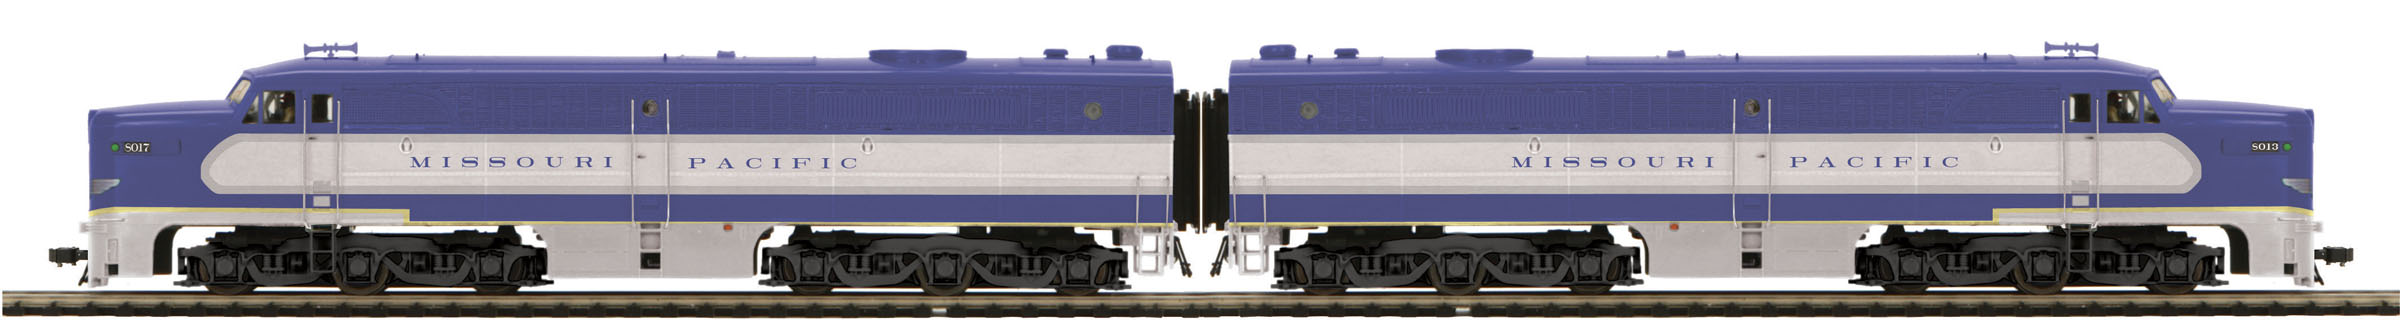 Product Search | MTH ELECTRIC TRAINS